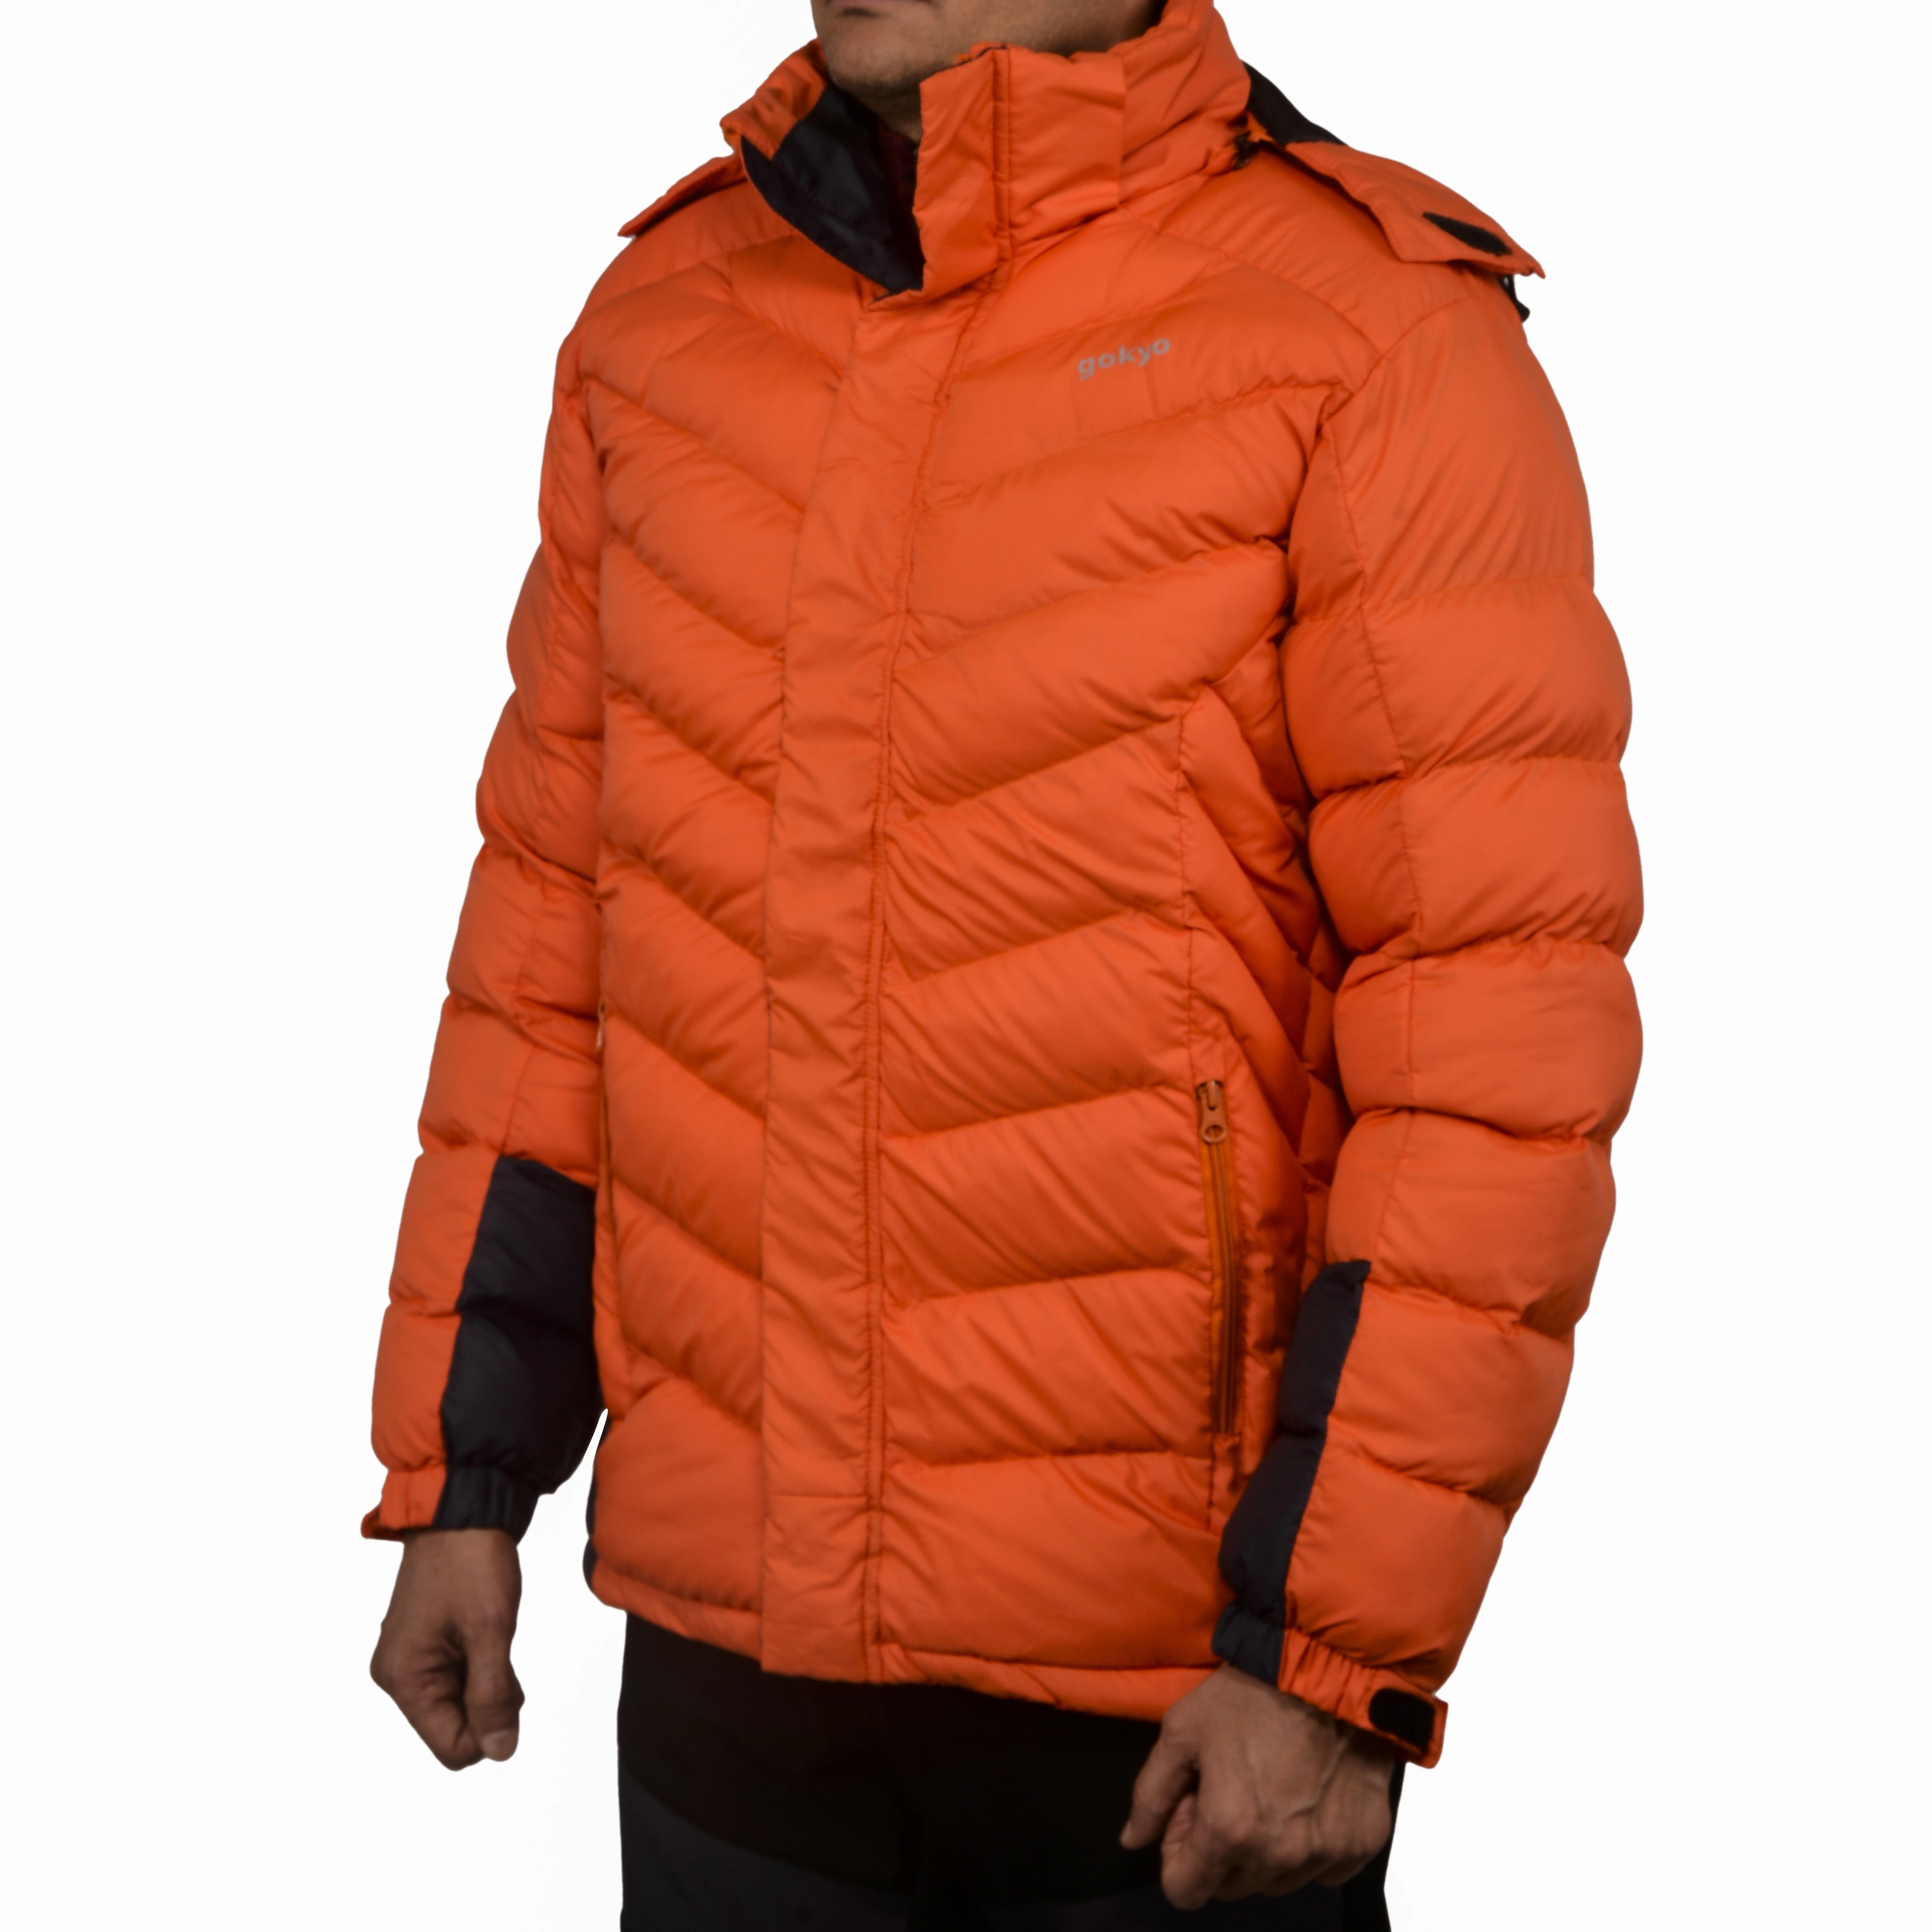 K2 Survivor Down Jacket for Men: Stylized Functionality for Extreme Cold Weather Expeditions (Up to -20°C)-S-Orange-2